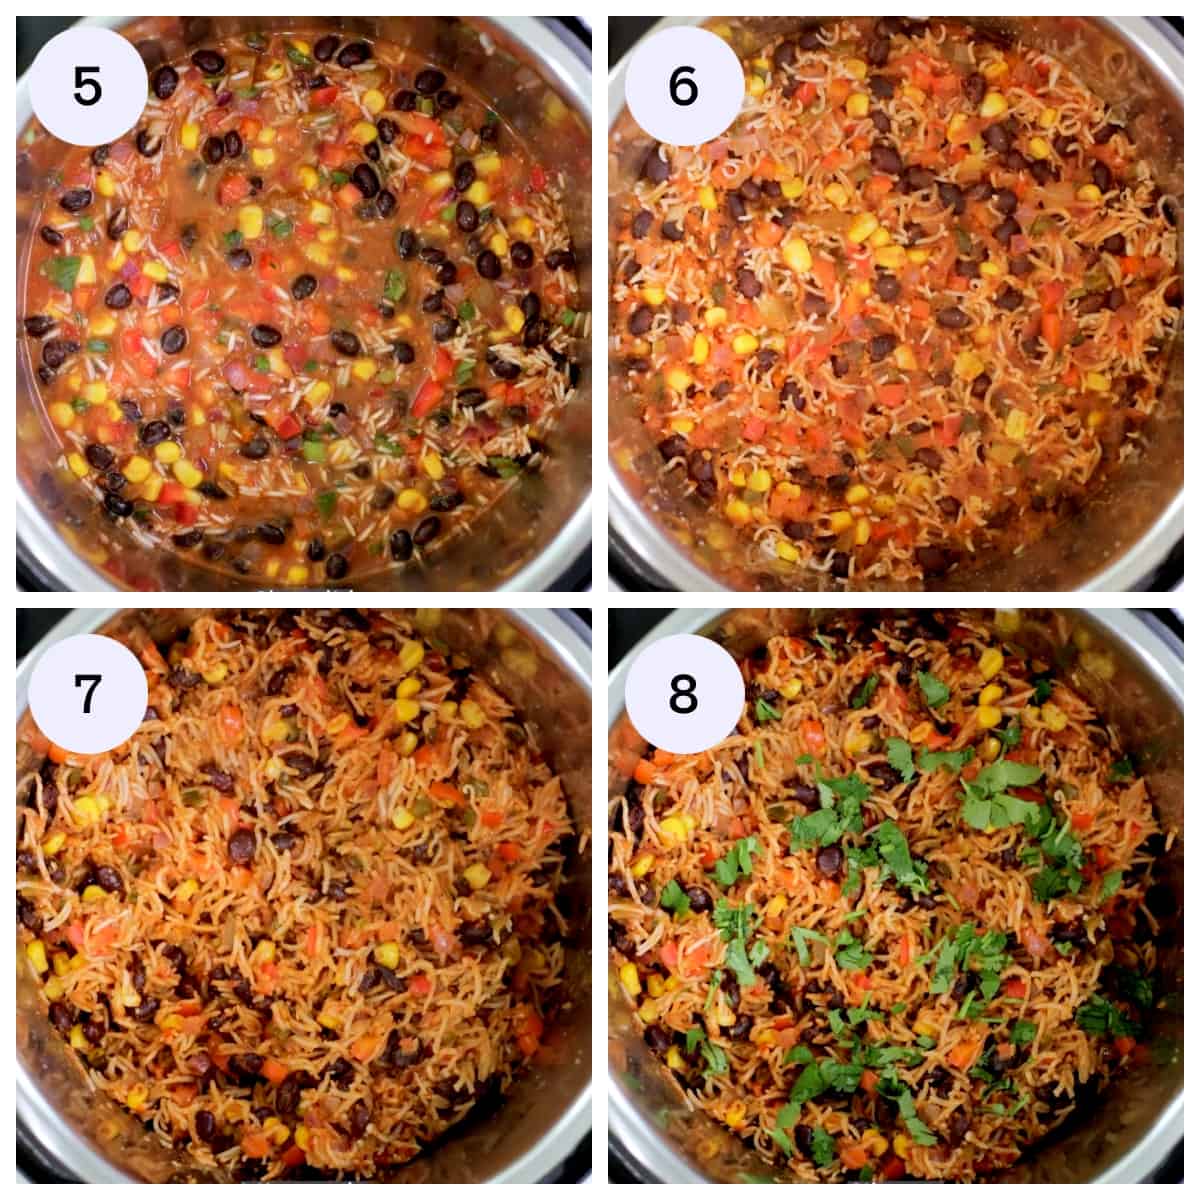 Steps to add water and pressure the Mexican rice and beans in Instant Pot